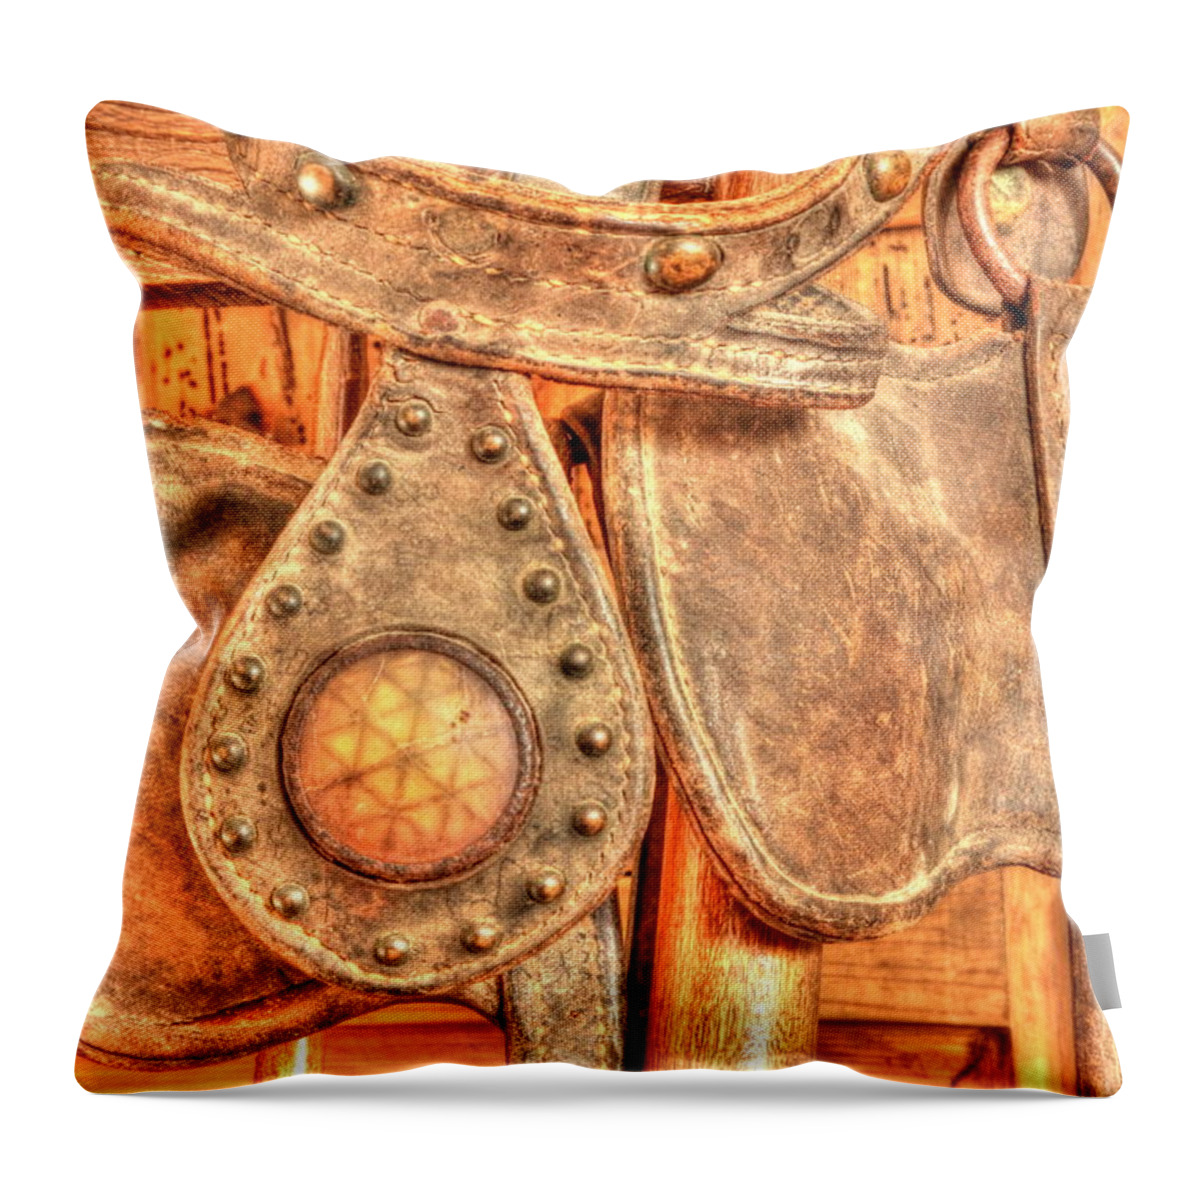 Bridle Throw Pillow featuring the photograph Antique Bridle by Jim Sauchyn